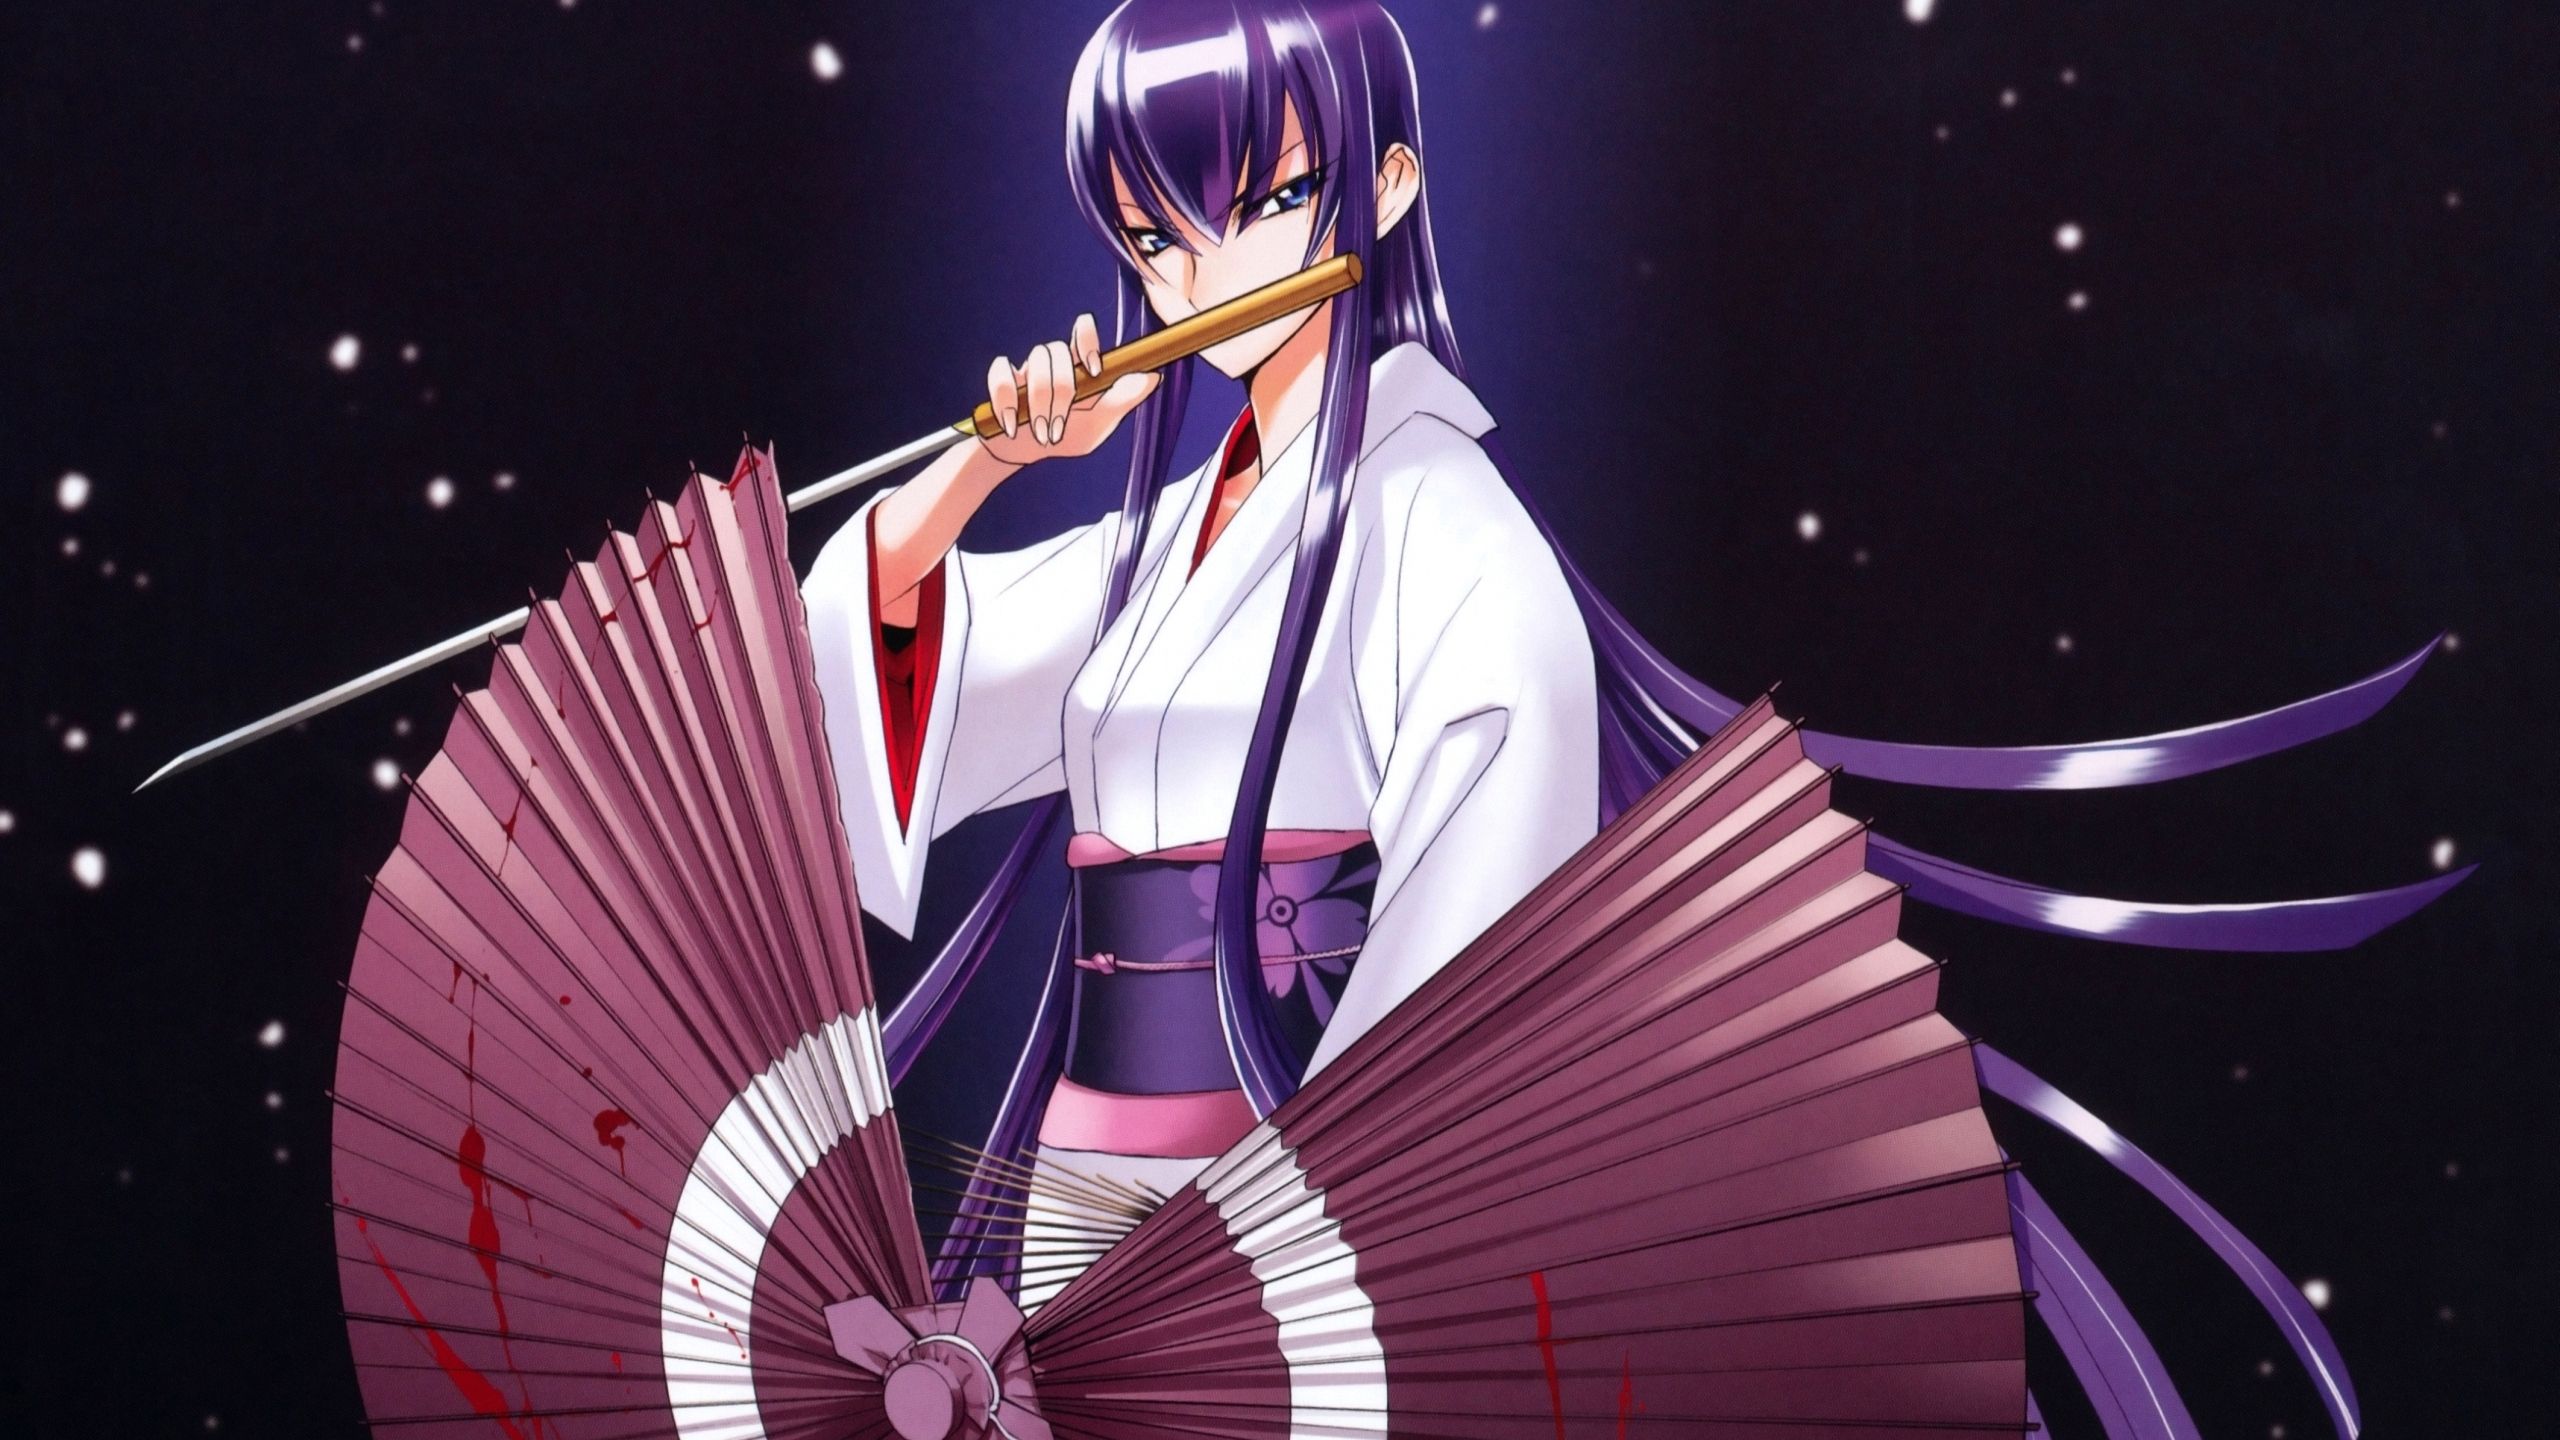 HD and Widescreen wallpapers of the swordmaiden Saeko Busujima from the Hig...